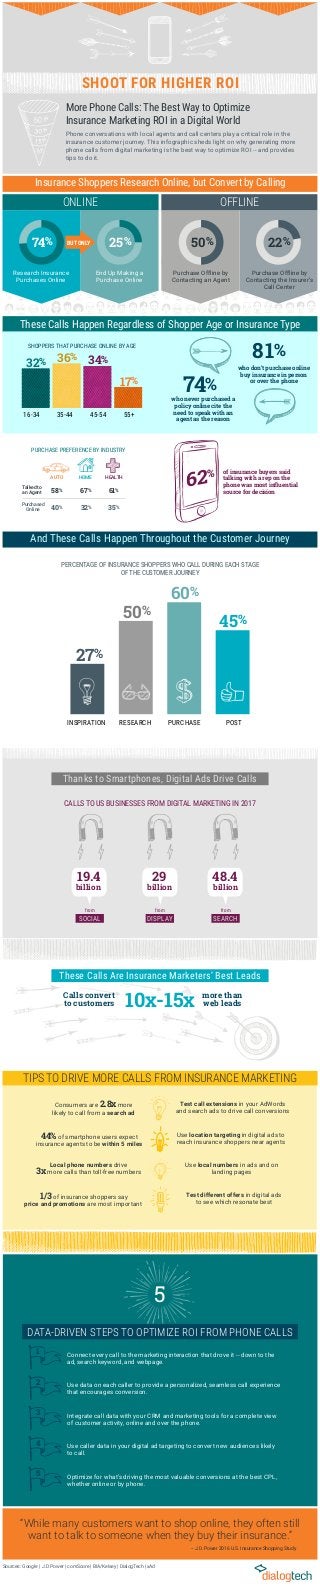 Thanks to Smartphones, Digital Ads Drive Calls
CALLS TO US BUSINESSES FROM DIGITAL MARKETING IN 2017
19.4
billion
SOCIAL
from
SEARCH
from
48.4
billion
DISPLAY
from
29
billion
10x-15xCalls convert
to customers
more than
web leads
These Calls Are Insurance Marketers’ Best Leads
TIPS TO DRIVE MORE CALLS FROM INSURANCE MARKETING
Consumers are 2.8x more
likely to call from a search ad
44% of smartphone users expect
insurance agents to be within 5 miles
Local phone numbers drive
3x more calls than toll-free numbers
1/3 of insurance shoppers say
price and promotions are most important
Test call extensions in your AdWords
and search ads to drive call conversions
Use location targeting in digital ads to
reach insurance shoppers near agents
Use local numbers in ads and on
landing pages
Test different offers in digital ads
to see which resonate best
5
DATA-DRIVEN STEPS TO OPTIMIZE ROI FROM PHONE CALLS
Connect every call to the marketing interaction that drove it -- down to the
ad, search keyword, and webpage.
1
Use data on each caller to provide a personalized, seamless call experience
that encourages conversion.
2
Integrate call data with your CRM and marketing tools for a complete view
of customer activity, online and over the phone.
3
Use caller data in your digital ad targeting to convert new audiences likely
to call.
4
Optimize for what’s driving the most valuable conversions at the best CPL,
whether online or by phone.
5
“While many customers want to shop online, they often still
want to talk to someone when they buy their insurance.”
-- J.D. Power 2016 U.S. Insurance Shopping Study
Sources: Google | J.D Power | comScore | BIA/Kelsey | DialogTech | xAd
INSPIRATION RESEARCH PURCHASE POST
27%
50%
60%
45%
PERCENTAGE OF INSURANCE SHOPPERS WHO CALL DURING EACH STAGE
OF THE CUSTOMER JOURNEY
81%
74%
who don’t purchase online
buy insurance in person
or over the phone
who never purchased a
policy online cite the
need to speak with an
agent as the reason
62% of insurance buyers said
talking with a rep on the
phone was most inﬂuential
source for decision
ONLINE OFFLINE
74% 25% 50% 22%BUT ONLY
Research Insurance
Purchases Online
End Up Making a
Purchase Online
Purchase Offline by
Contacting an Agent
Purchase Offline by
Contacting the Insurer’s
Call Center
Insurance Shoppers Research Online, but Convert by Calling
These Calls Happen Regardless of Shopper Age or Insurance Type
And These Calls Happen Throughout the Customer Journey
PURCHASE PREFERENCE BY INDUSTRY
Talked to
an Agent 58% 67% 61%
40% 32% 35%
AUTO HOME HEALTH
Purchased
Online
32% 36% 34%
17%
16-34 35-44 45-54 55+
SHOPPERS THAT PURCHASE ONLINE BY AGE
Phone conversations with local agents and call centers play a critical role in the
insurance customer journey. This infographic sheds light on why generating more
phone calls from digital marketing is the best way to optimize ROI -- and provides
tips to do it.
More Phone Calls: The Best Way to Optimize
Insurance Marketing ROI in a Digital World
SHOOT FOR HIGHER ROI
 